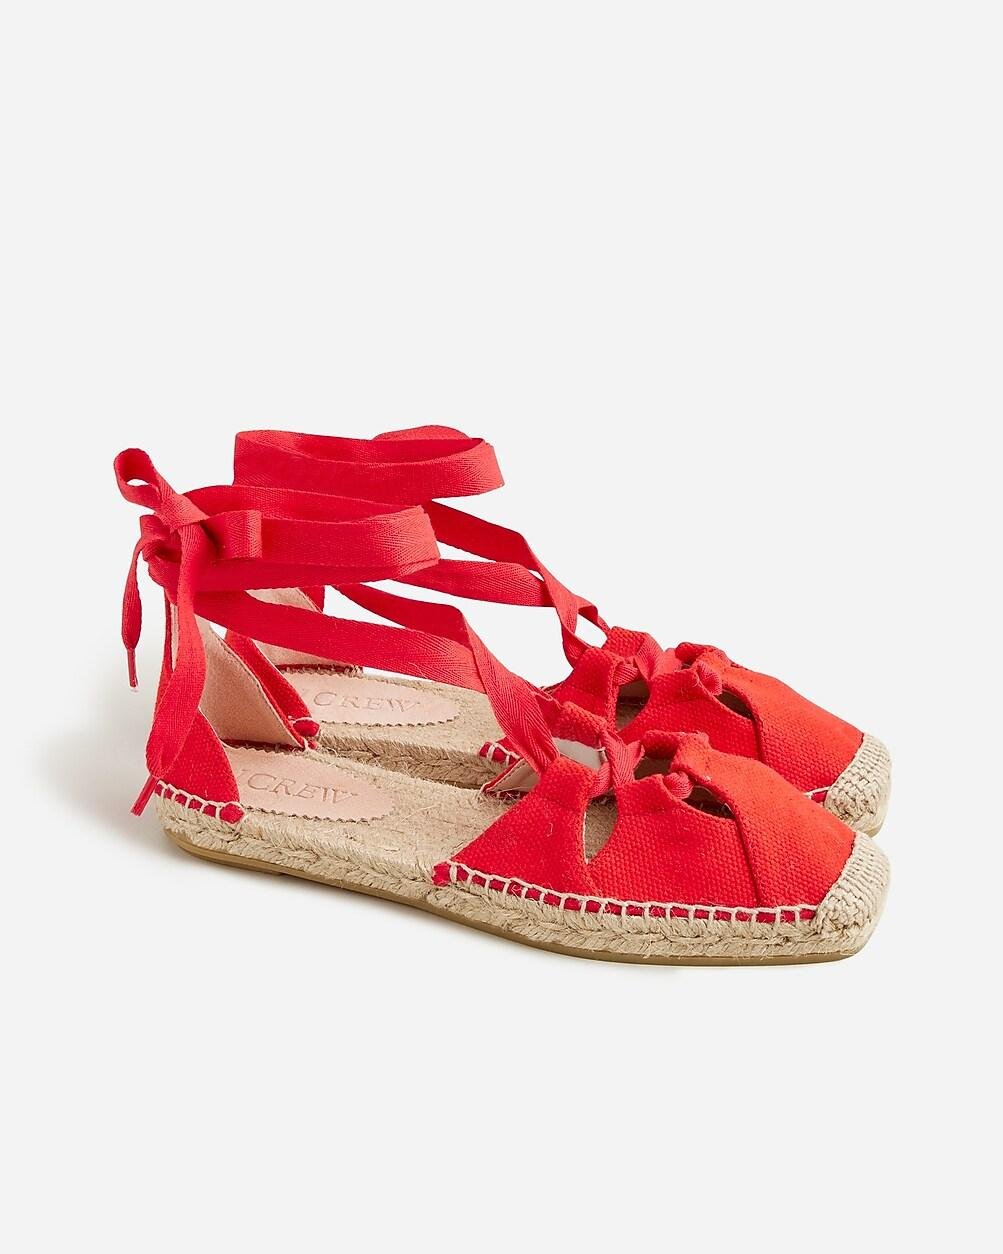 Made-in-Spain cutout lace-up espadrilles by J.CREW